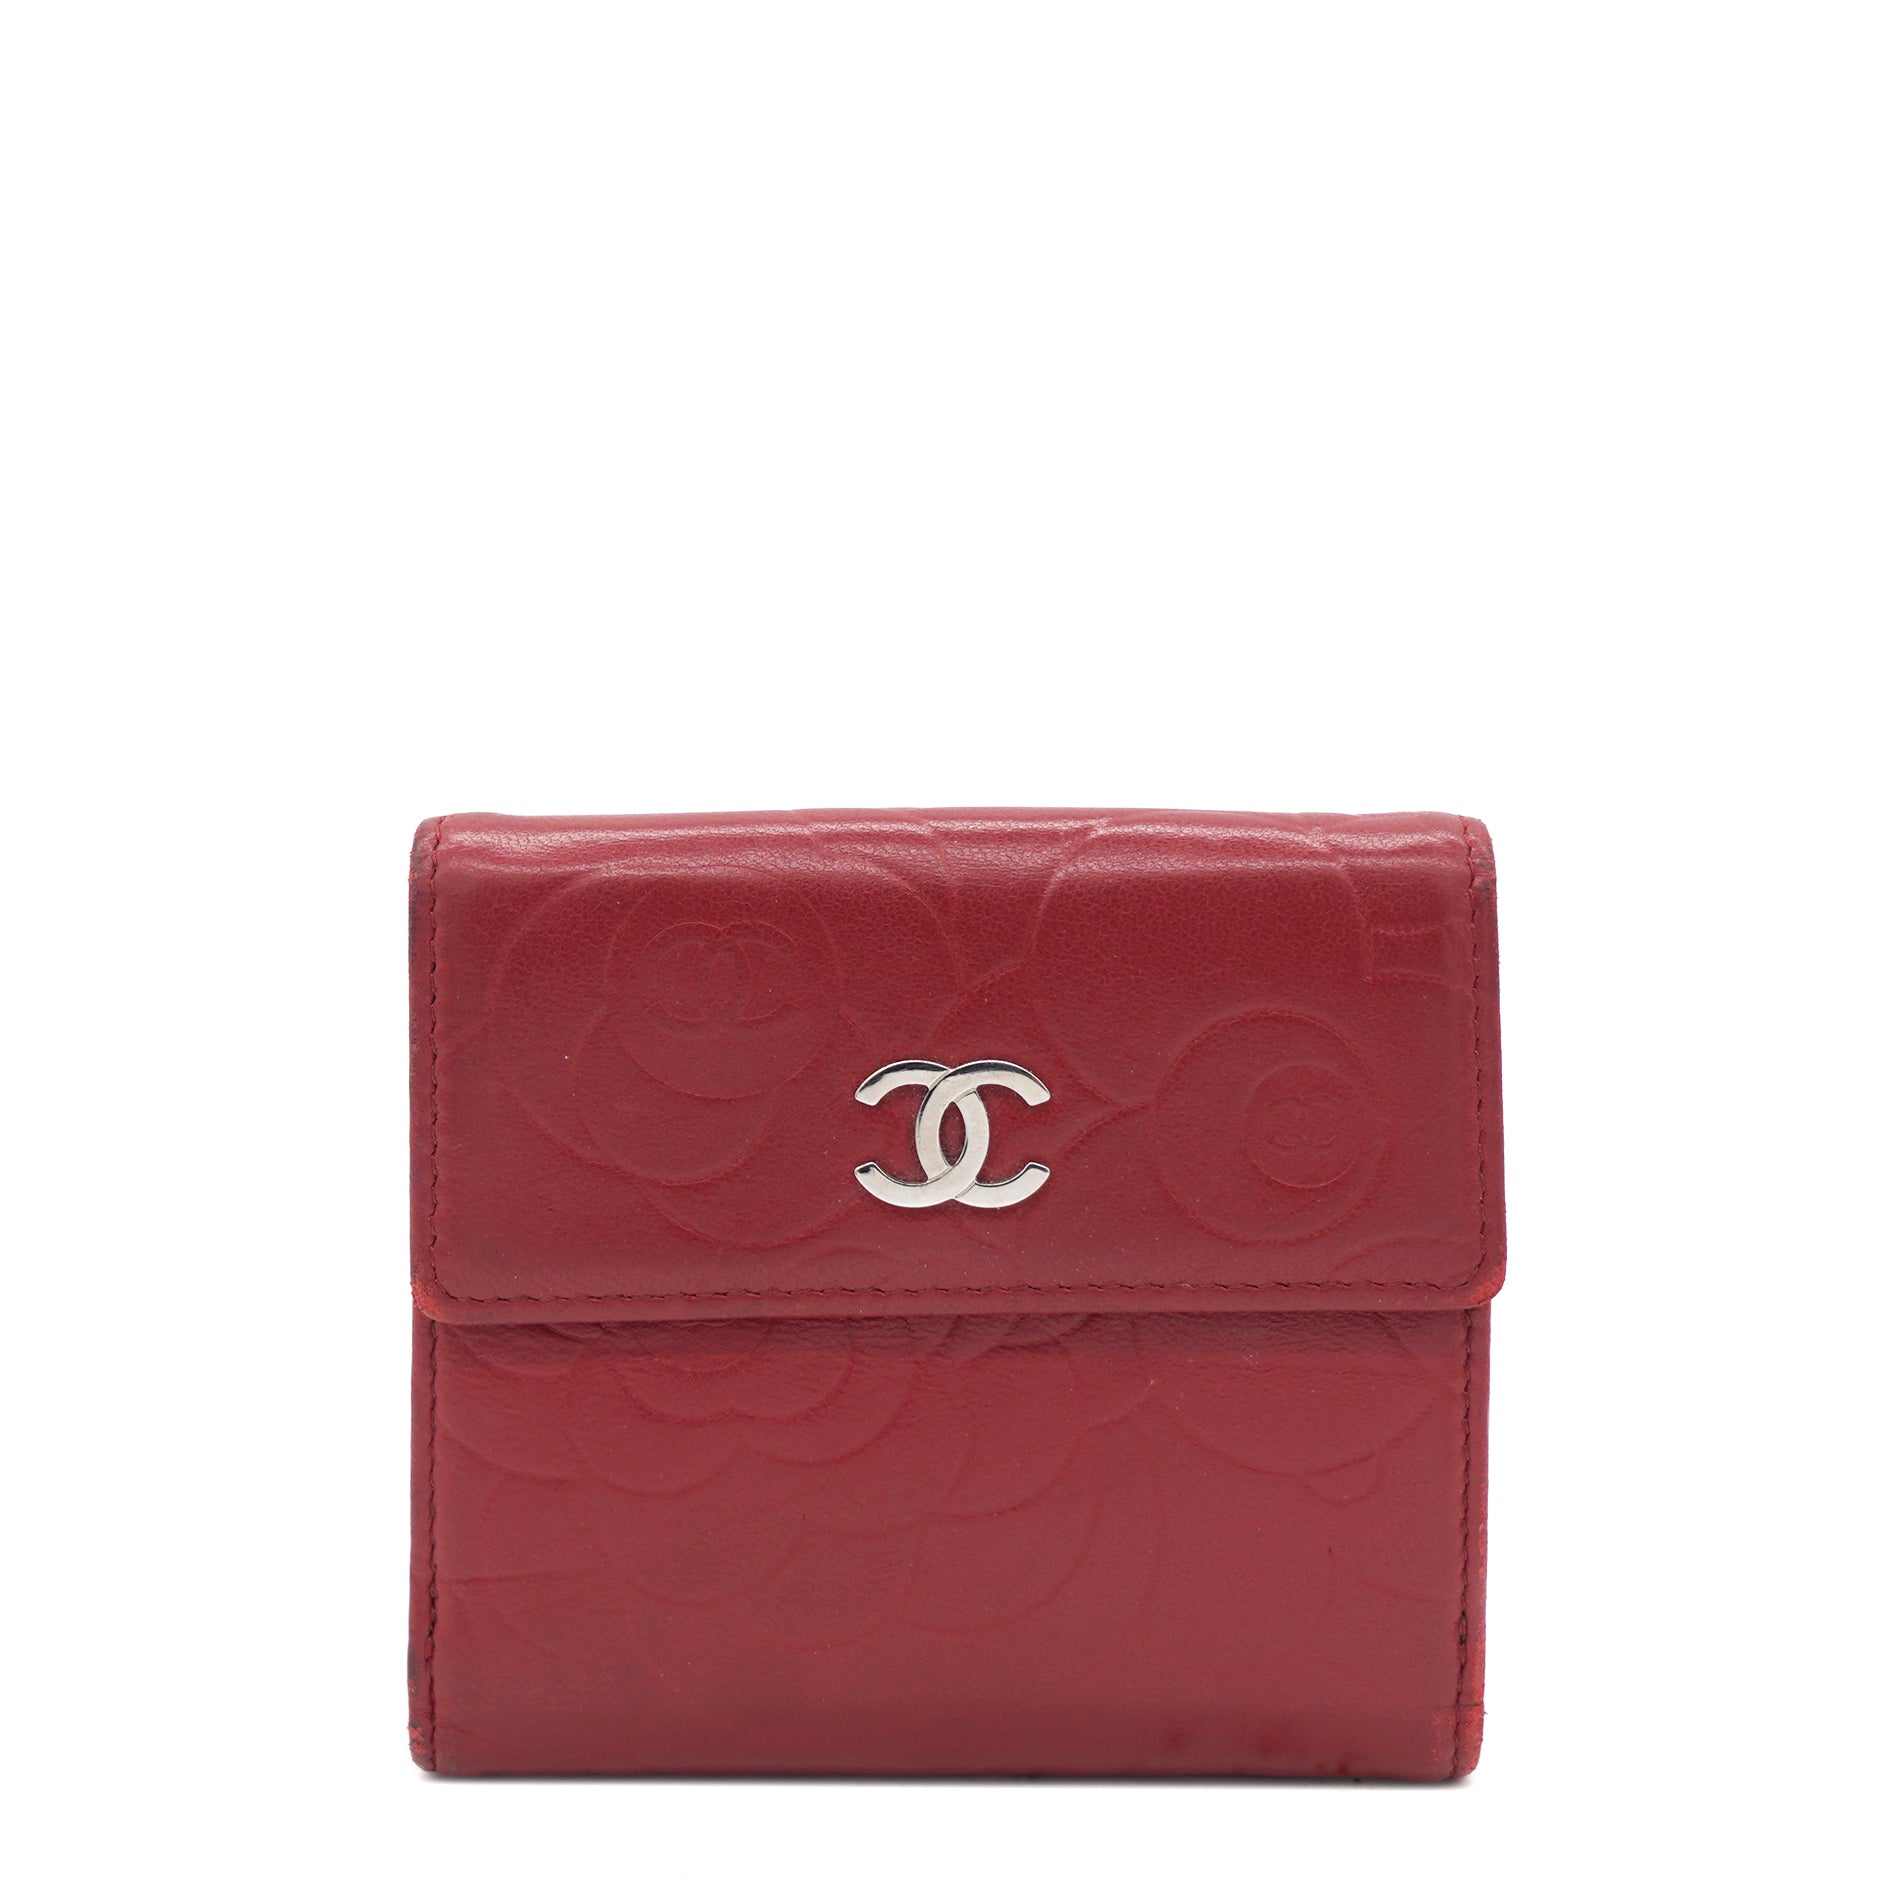 Preloved CHANEL Camellia CC Red Lambskin Wallet 20351492 060223